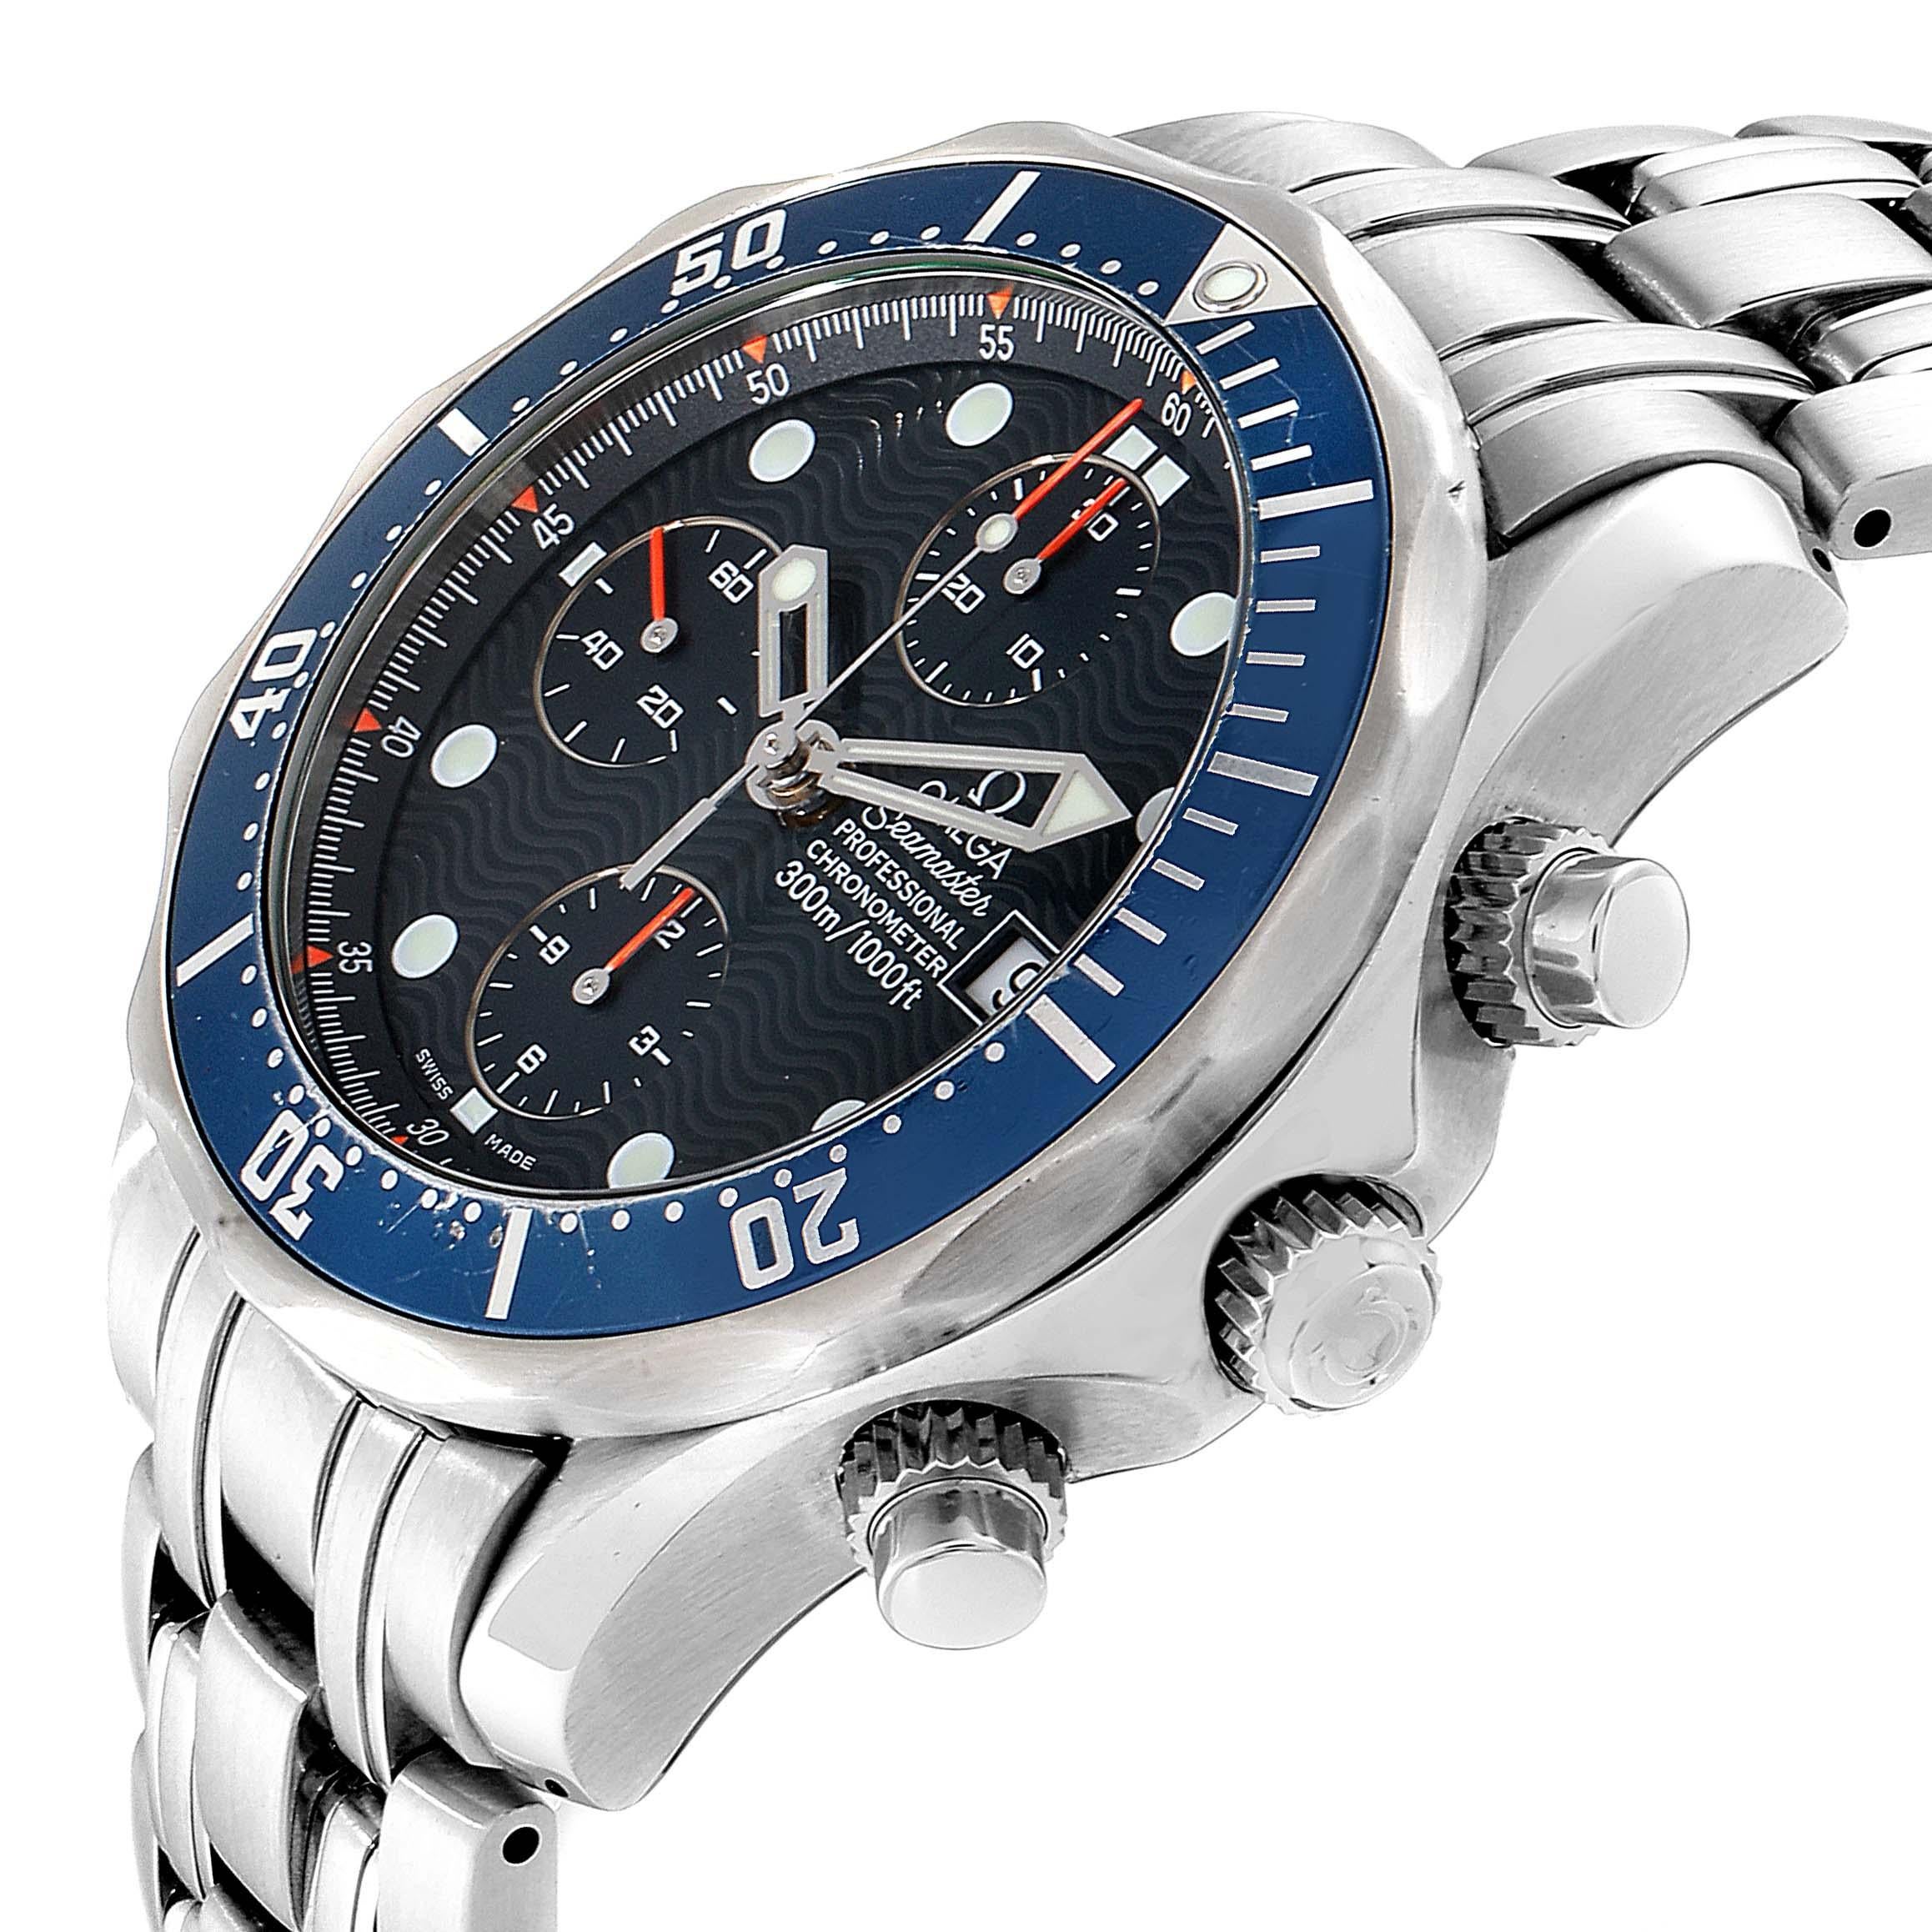 Omega Seamaster Bond Chrono Blue Wave Dial Men’s Watch 2599.80.00 For Sale 1